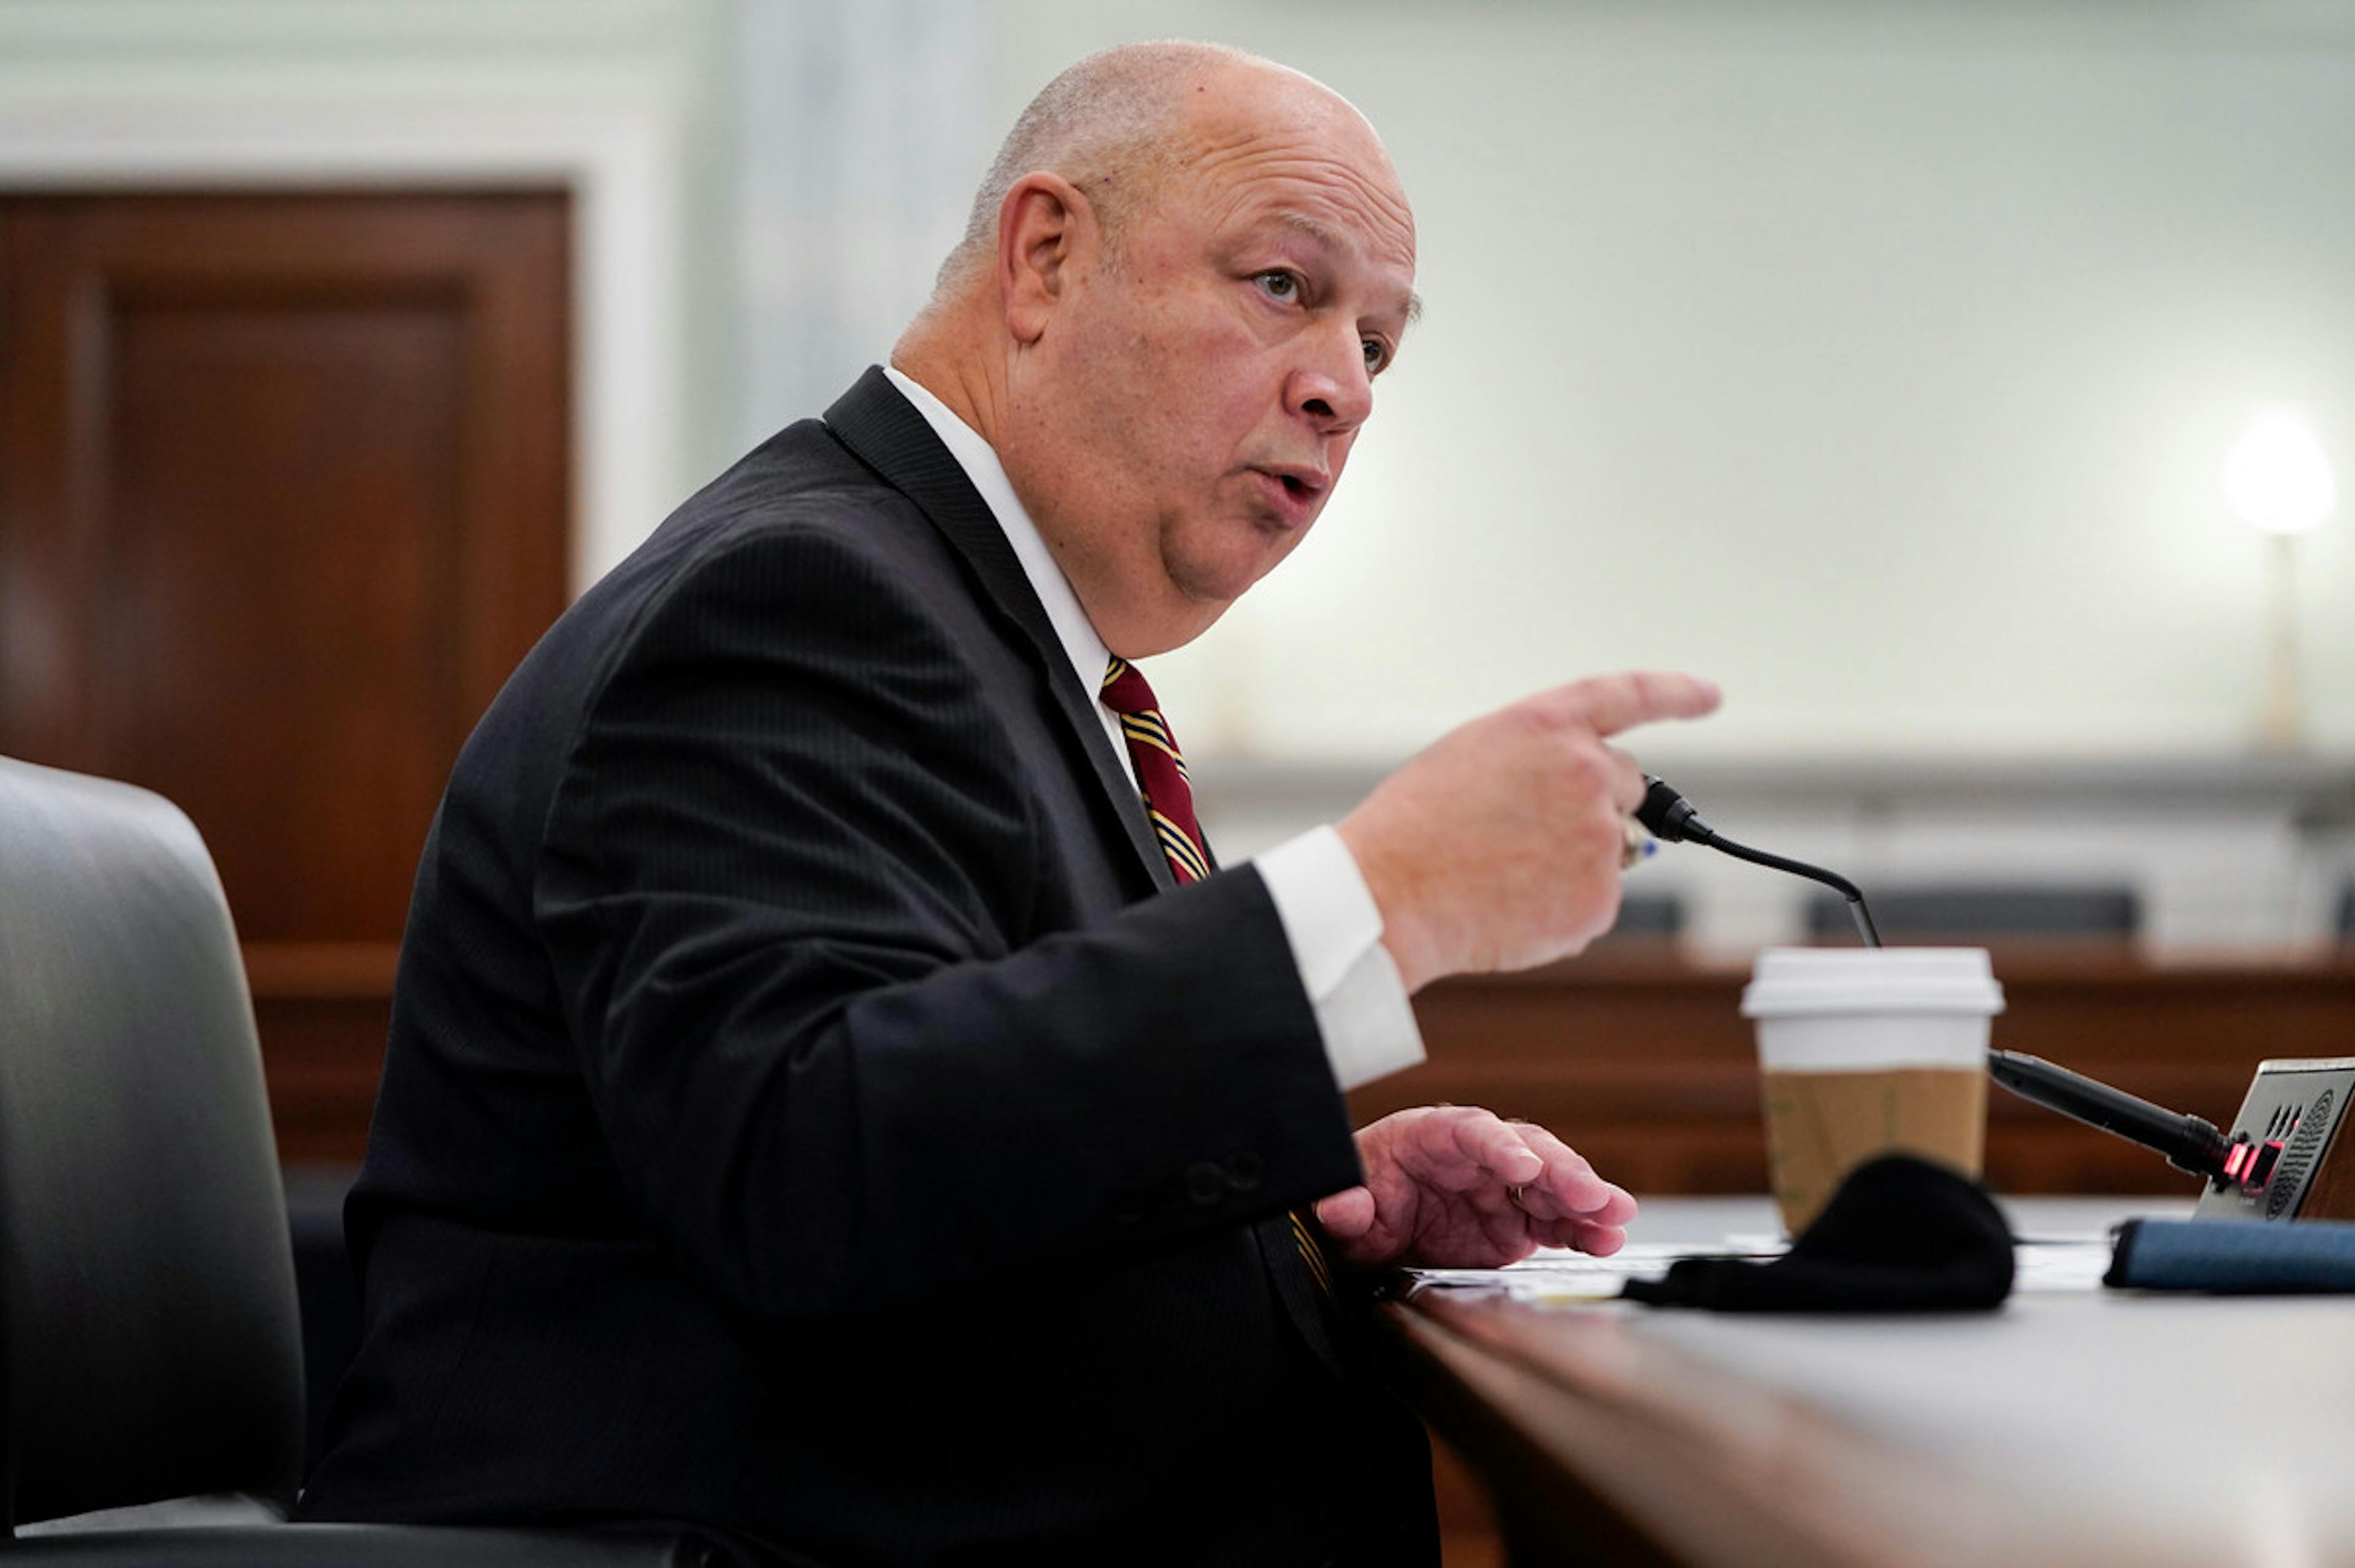 FAA Administrator Steve Dickson, shown testifying in 2021, spent a lot of his time dealing with the crisis over the Boeing 737 MAX. If Pai was aggressive and brash, Dickson tended to be rules-focused and methodical. Credit: Joshua Roberts/Getty Images